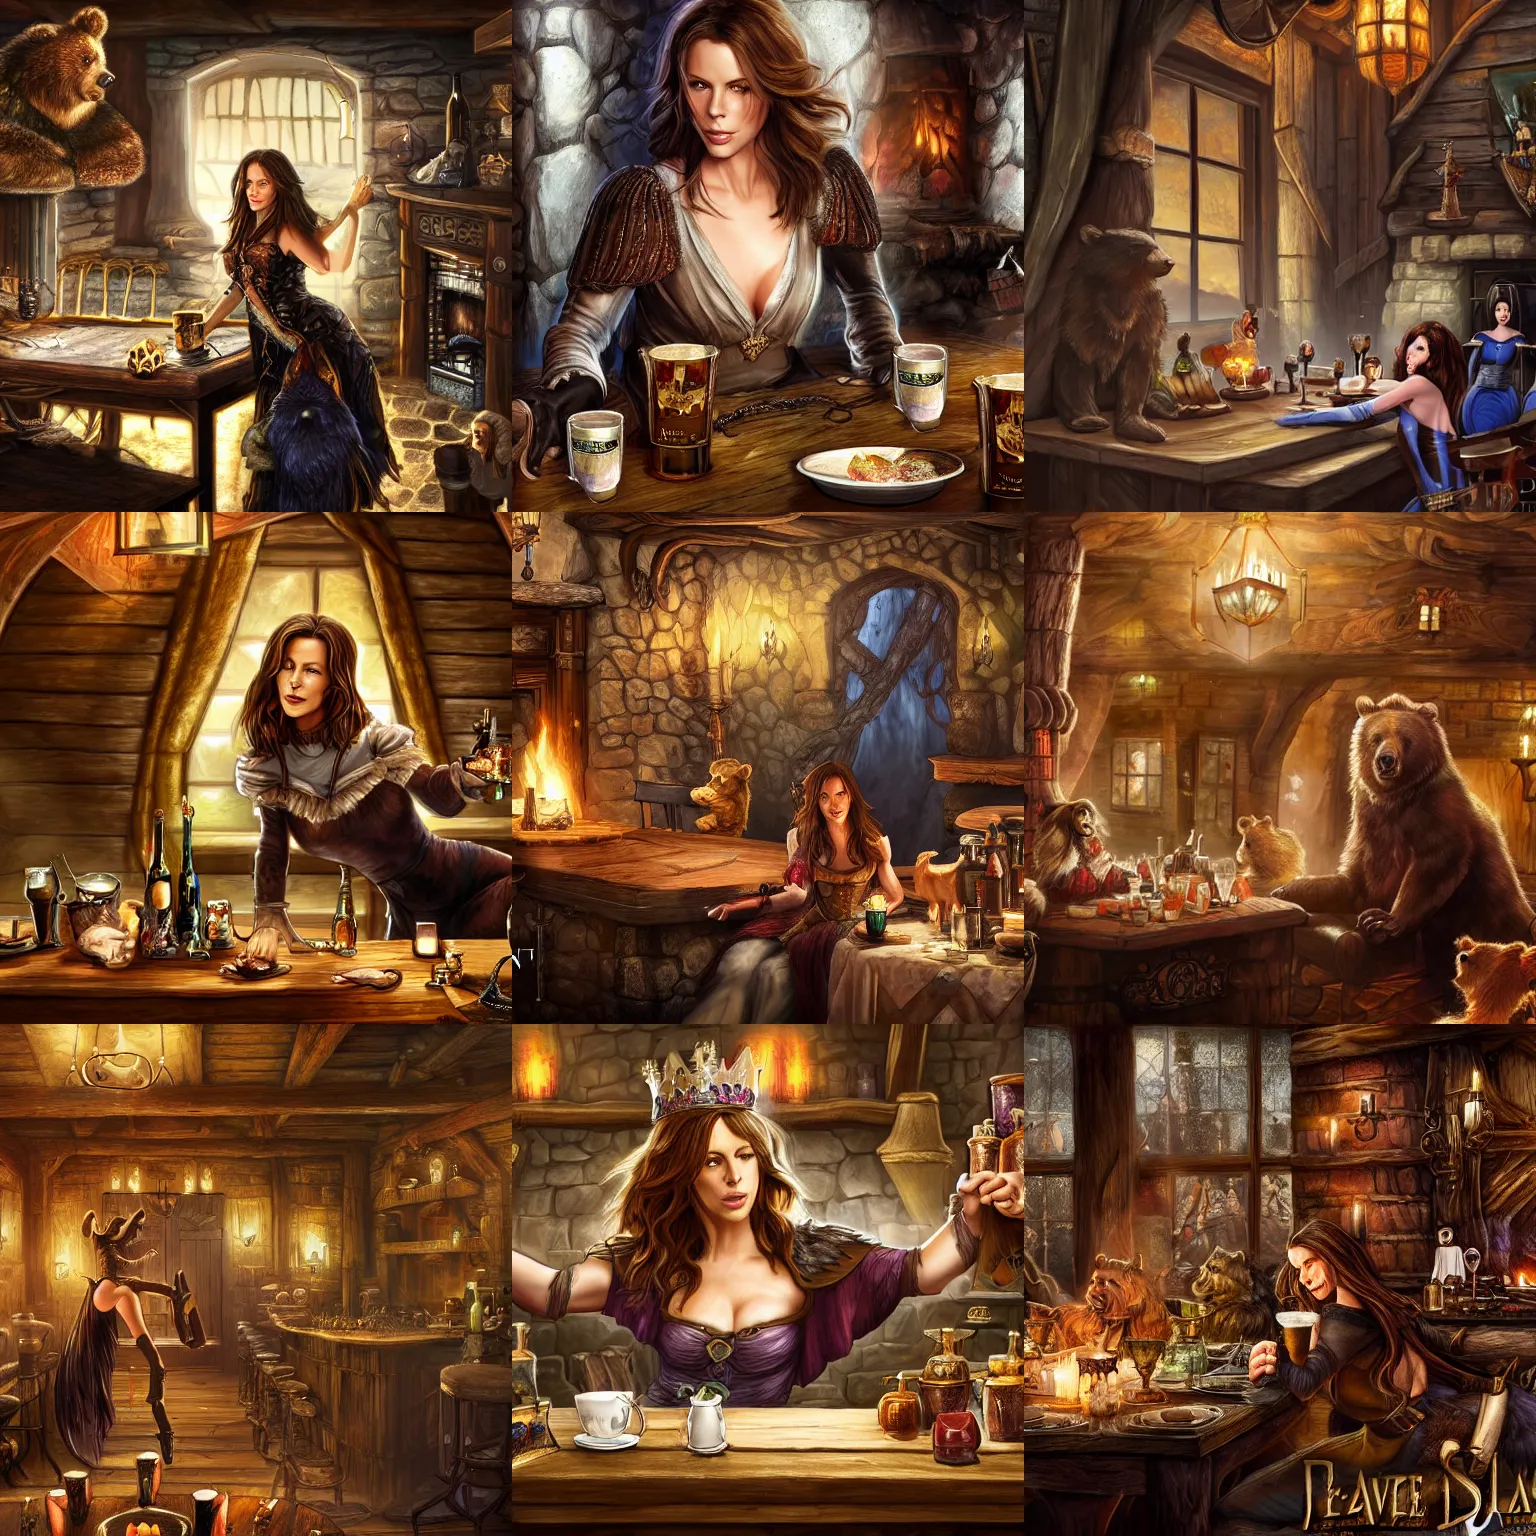 Prompt: kate beckinsale sleep fall head on table, in fantasy tavern near fireplace, behind bar deck with bear mugs, medieval dnd, colorfull digital fantasy art, 4k